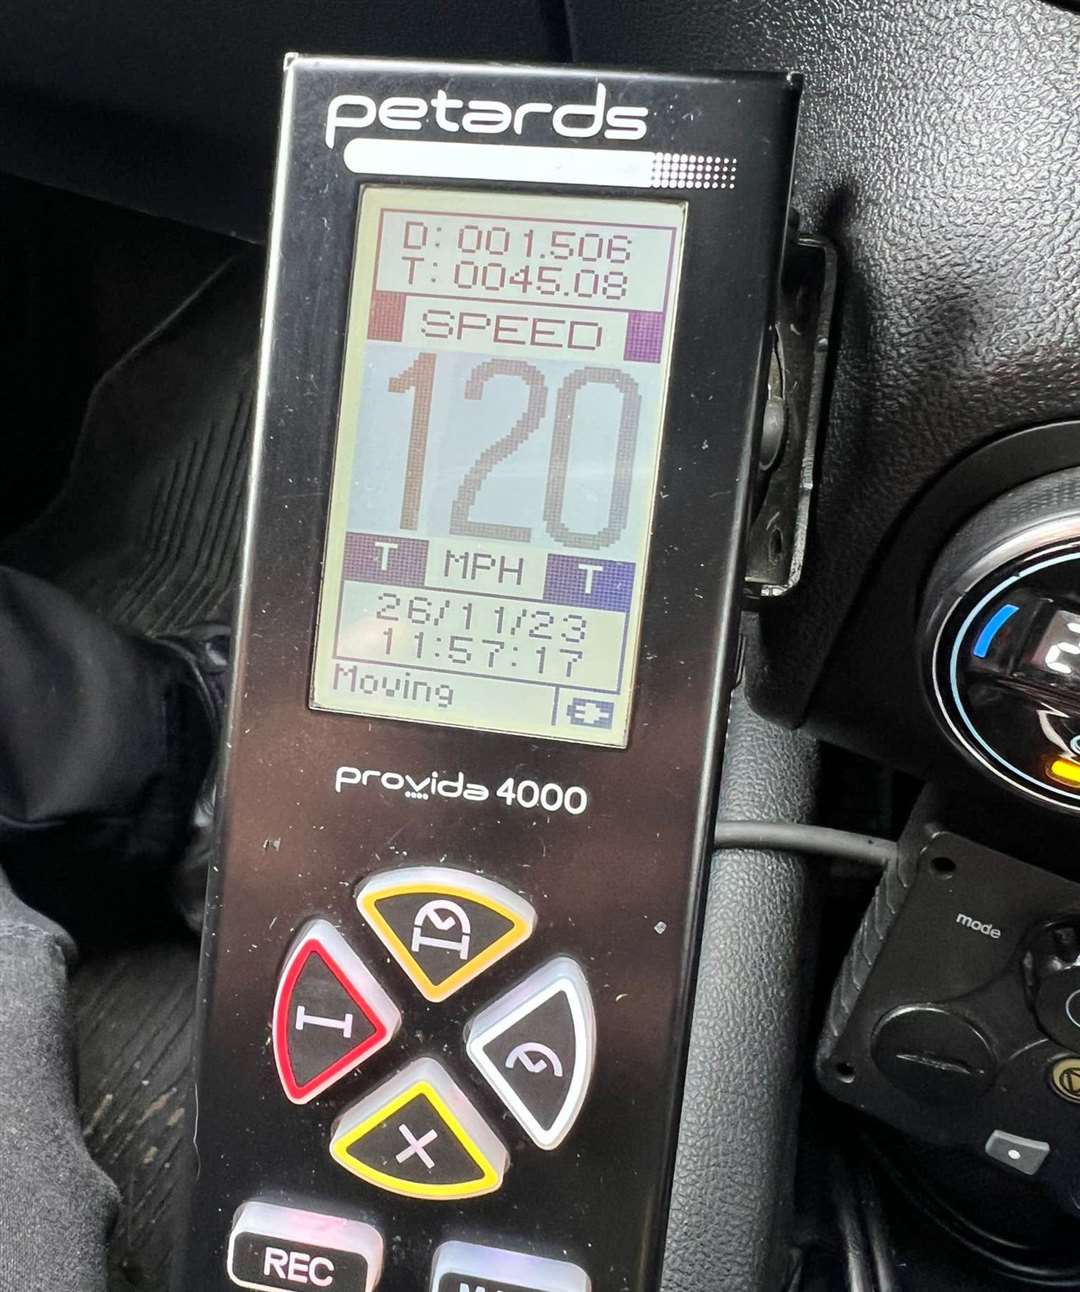 The driver was recorded doing 120mph